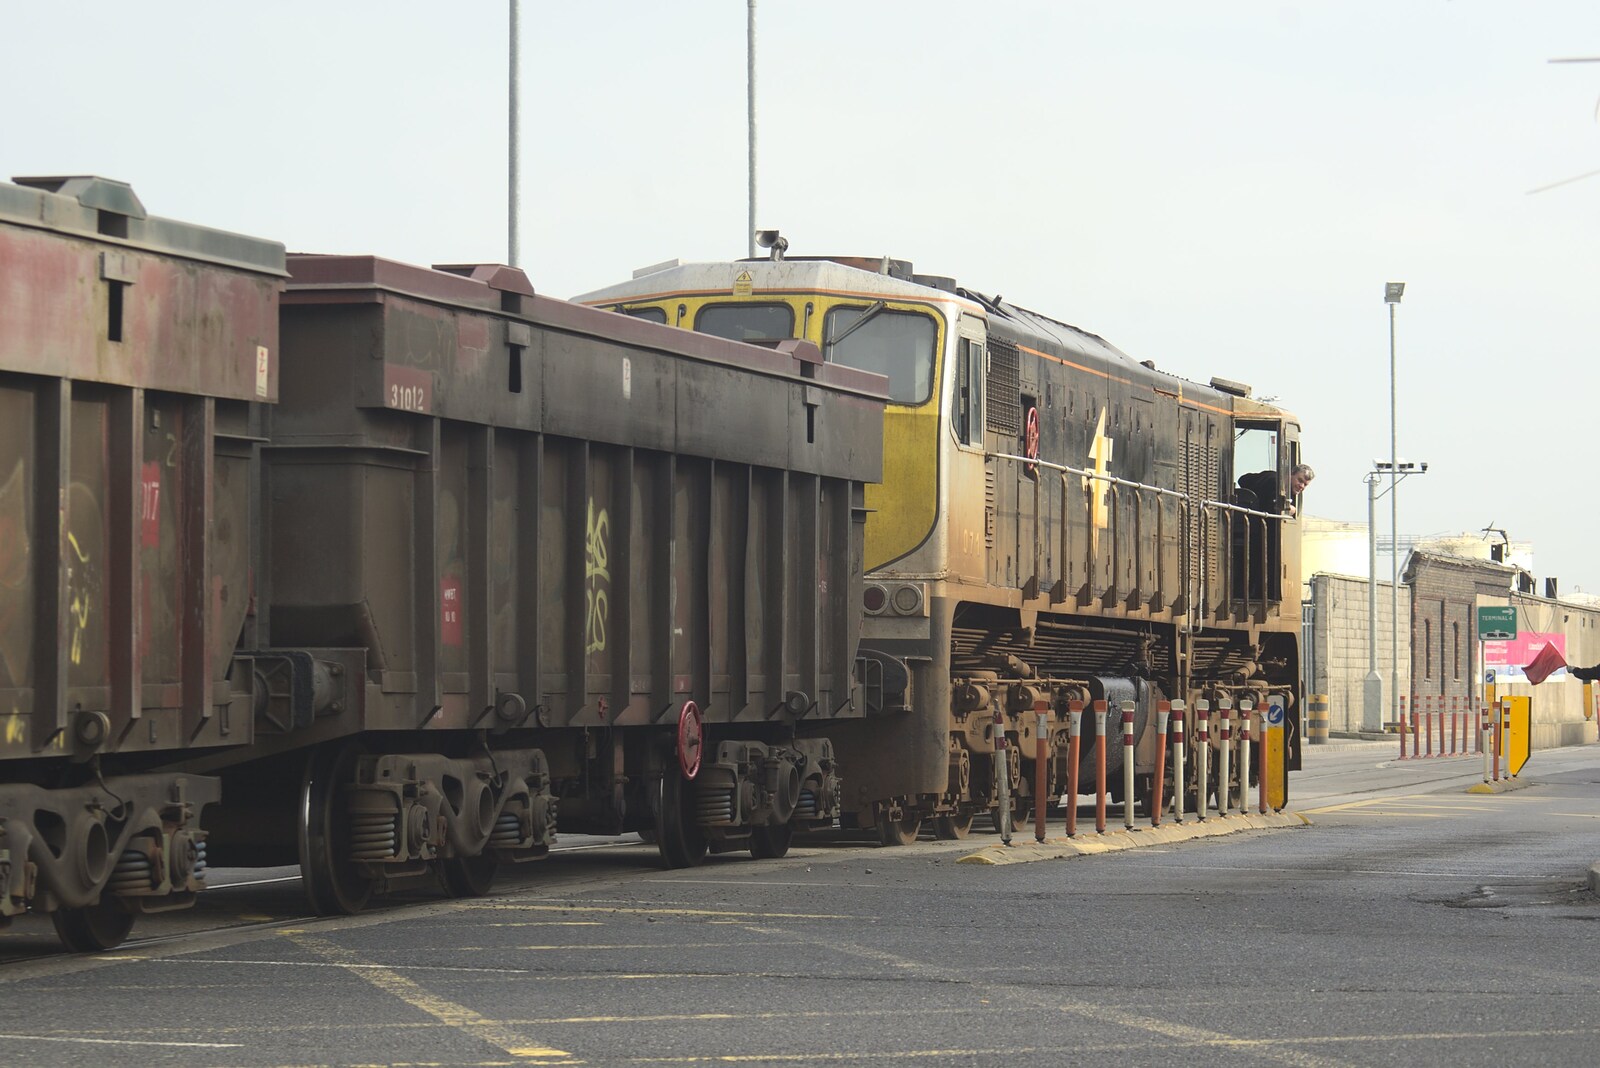 A CIE Class 141 loco rumbles across East Wall Road from A Week in Monkstown, County Dublin, Ireland - 1st March 2011